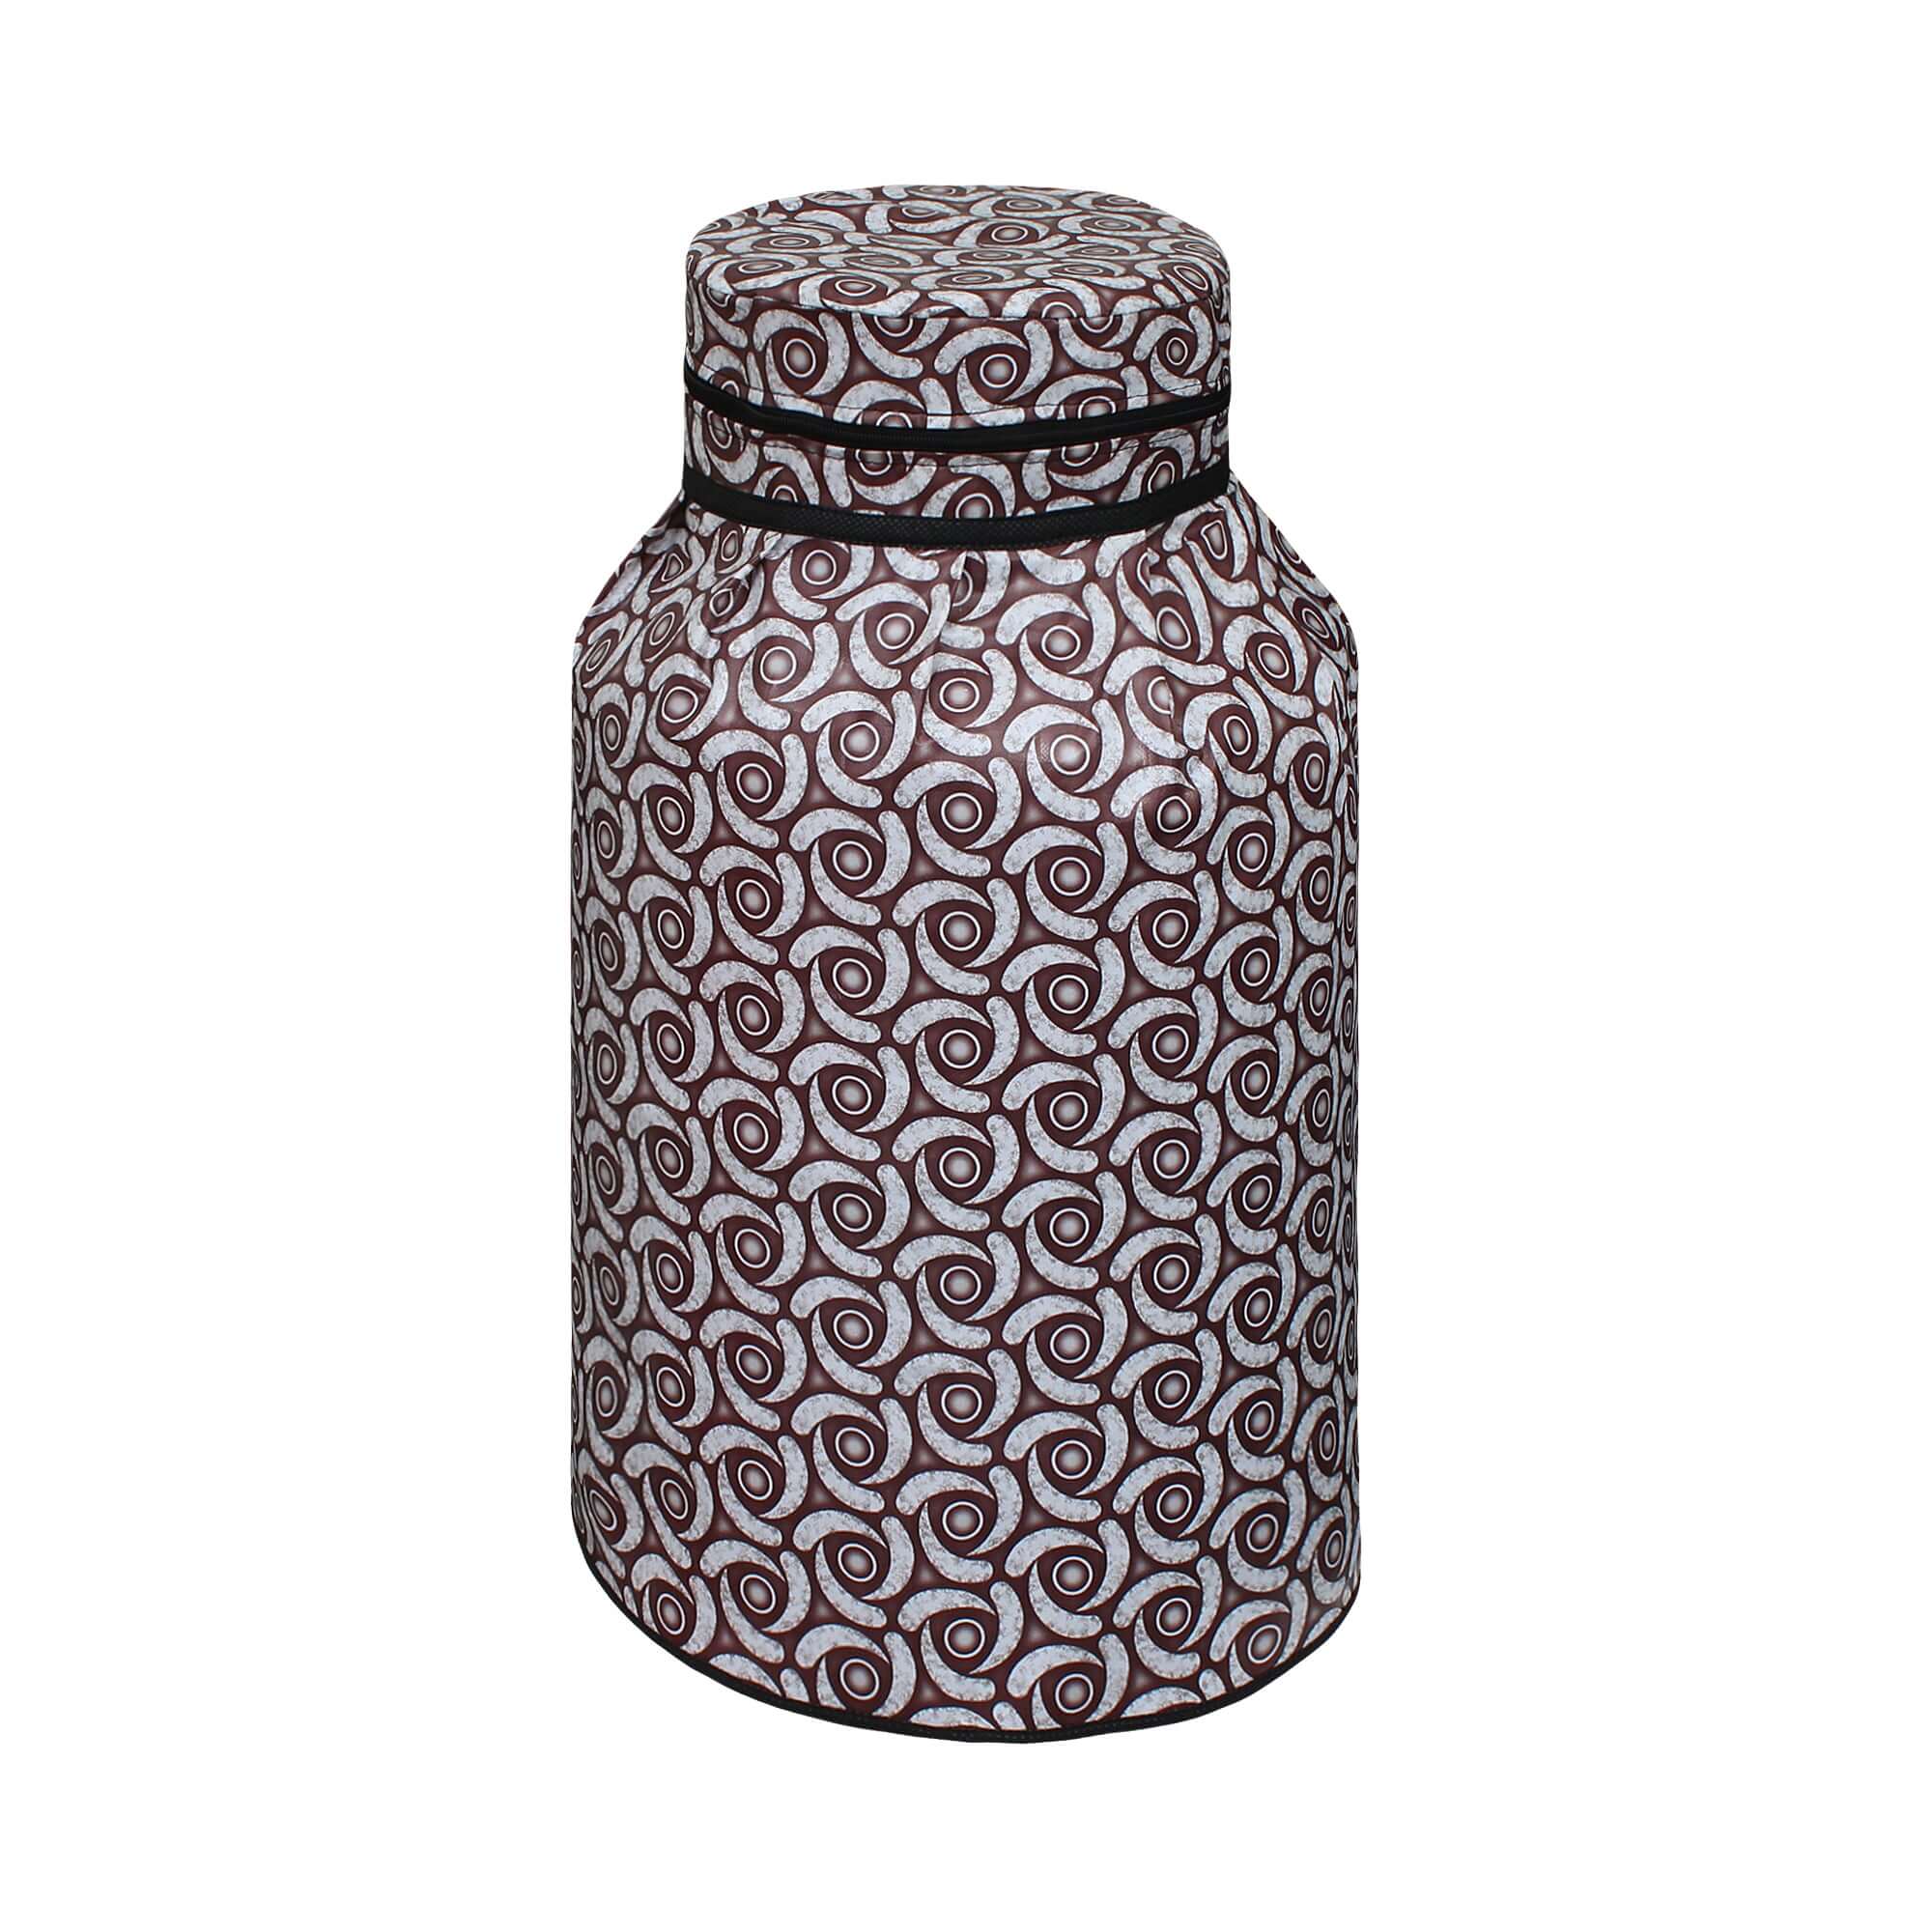 LPG Gas Cylinder Cover, SA59 - Dream Care Furnishings Private Limited